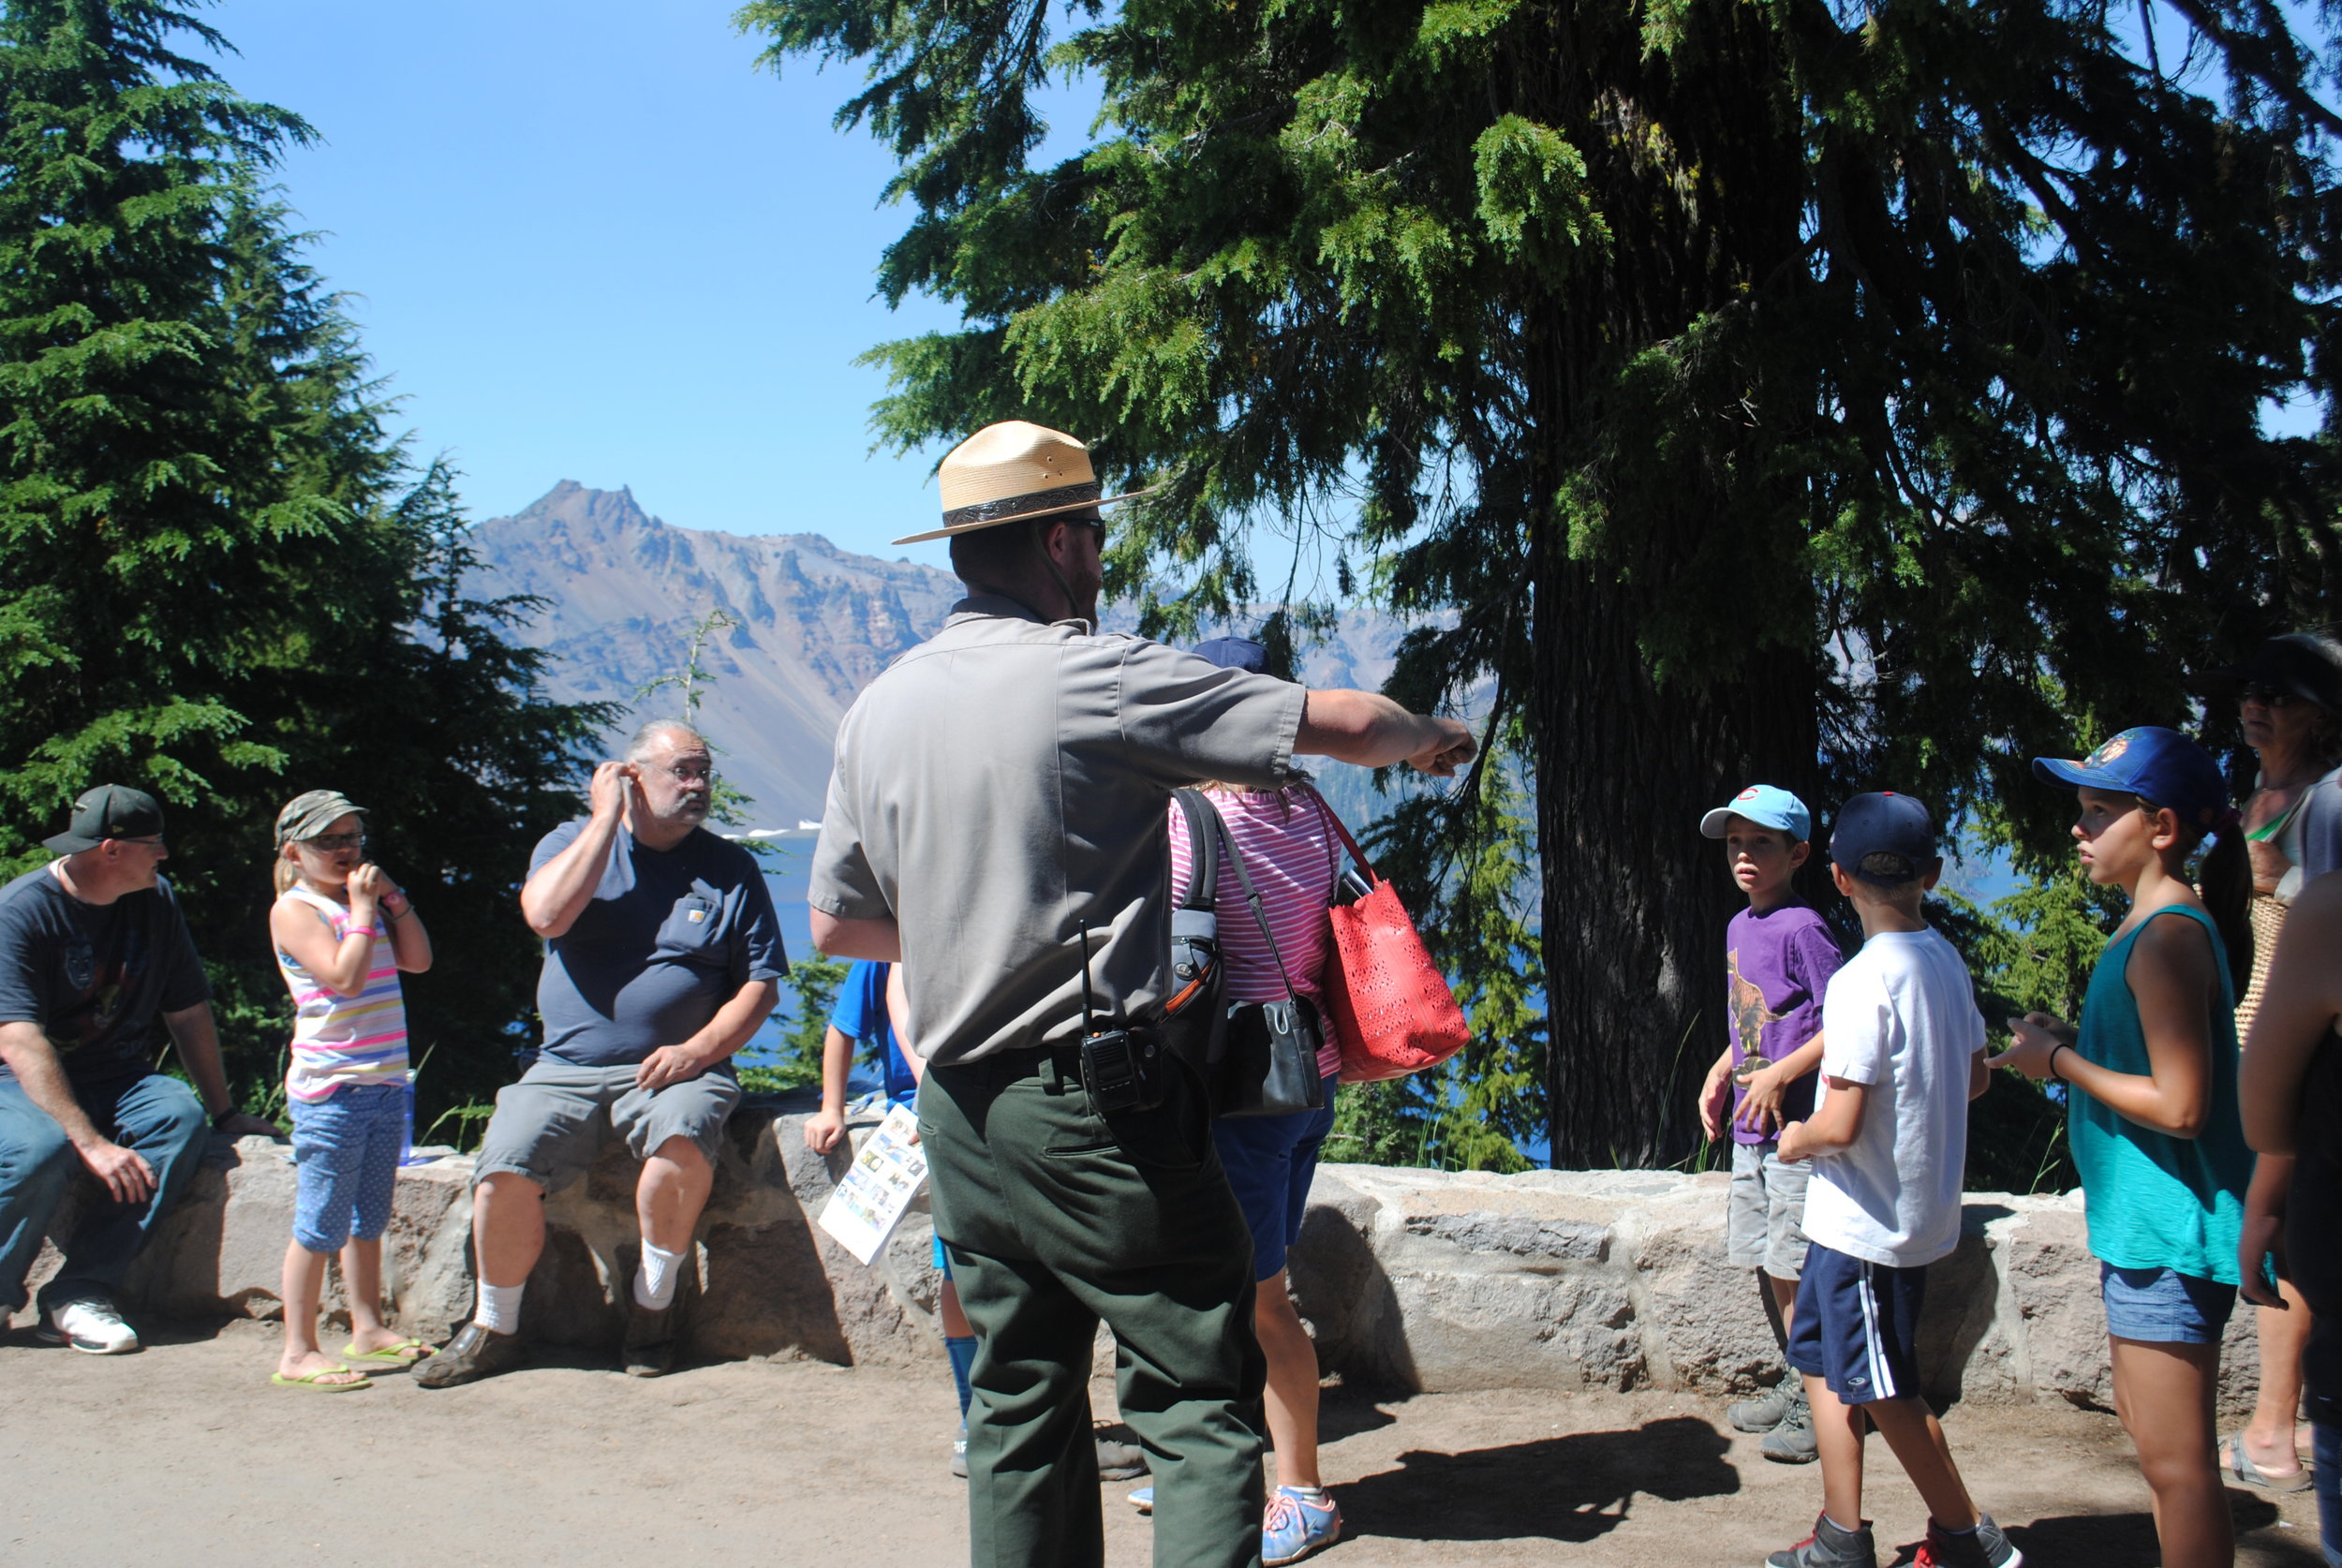 CRATER LAKE - What to do in Southern Oregon - Summer - Things to do - Kids - Hiking - Junior Rangers